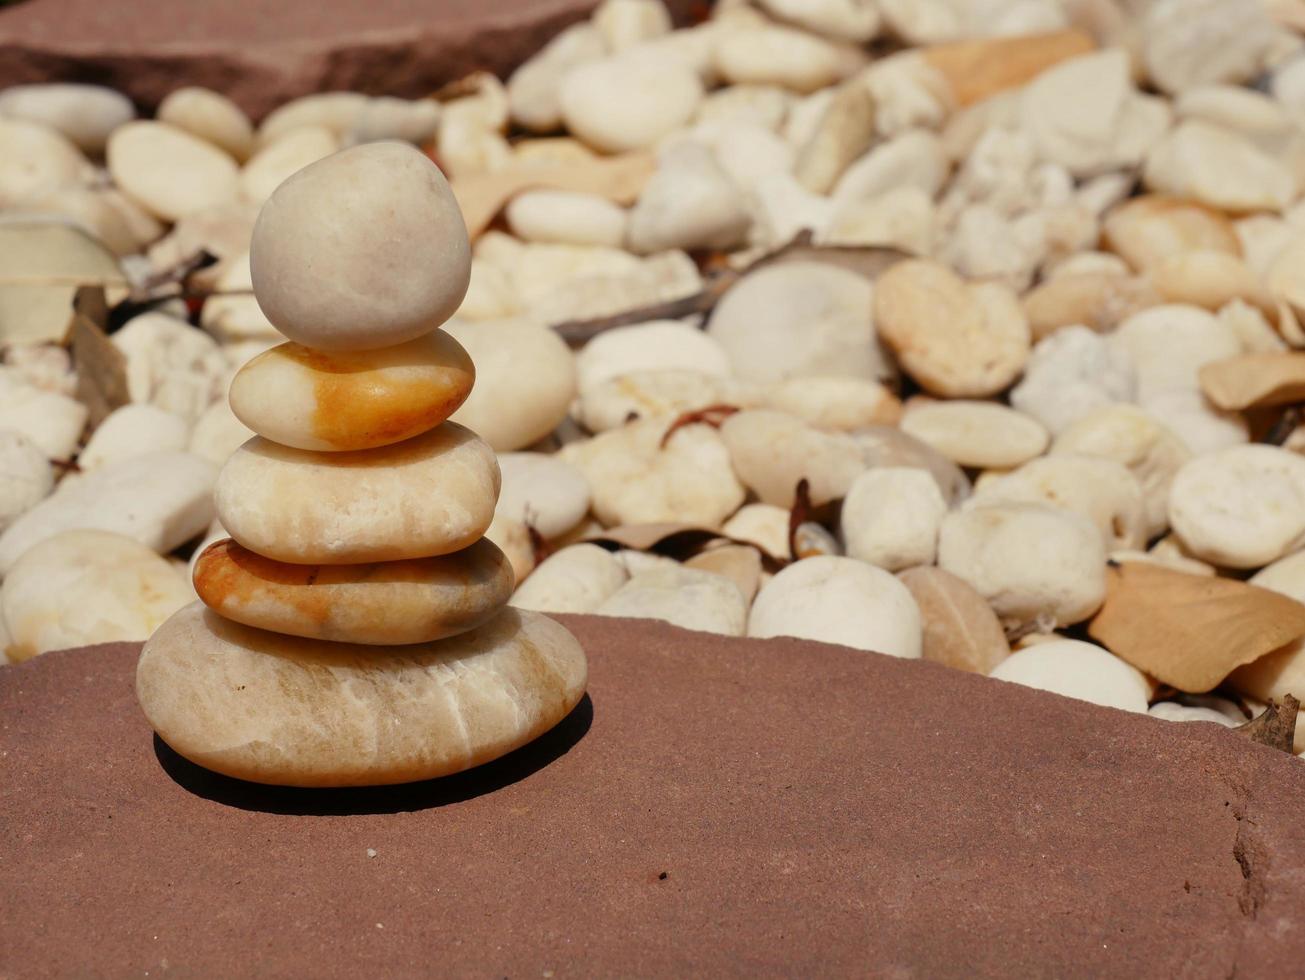 The Balance Stones are stacked as pyramids in a soft natural bokeh background, representing the calm philosophical concept of Jainism's wellness. photo